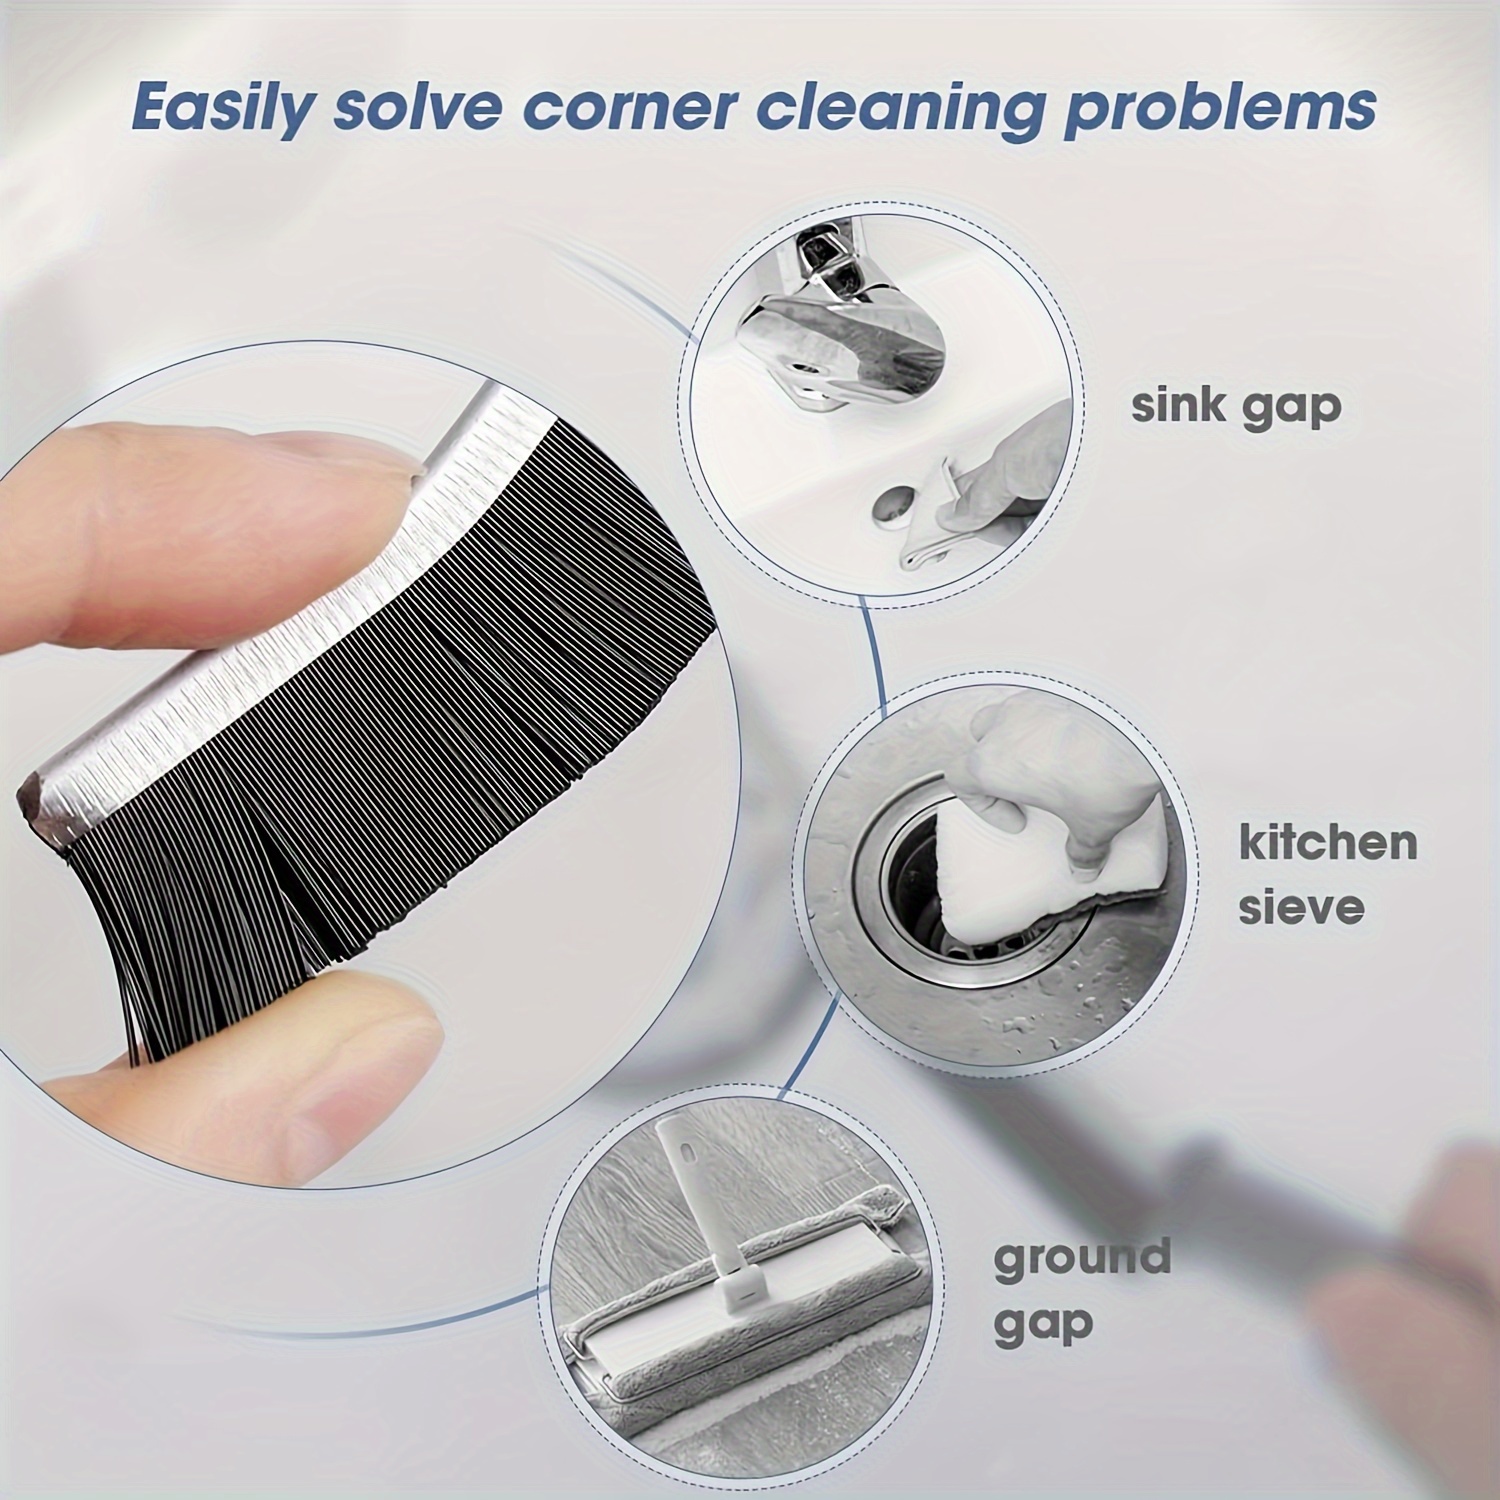 2 in 1 Groove Cleaning Tool Window Crevice Cleaning Tool Cove